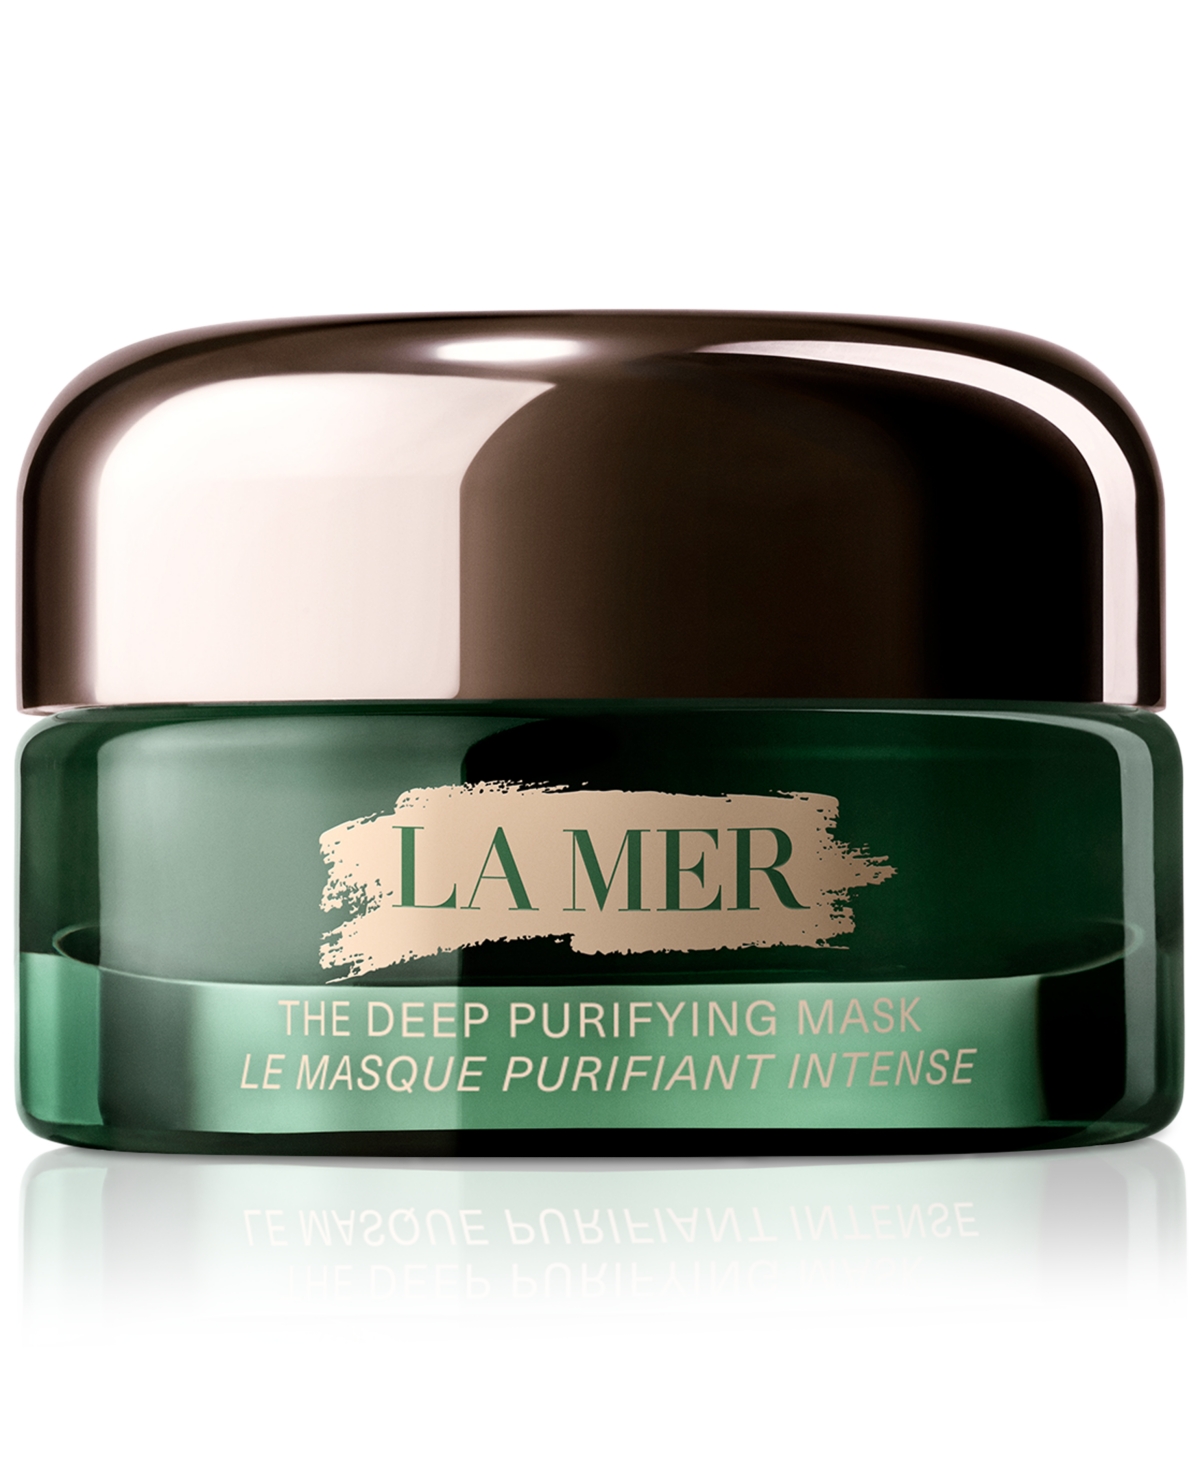 La Mer The Deep Purifying Mask, 1.7 Oz. In No Color